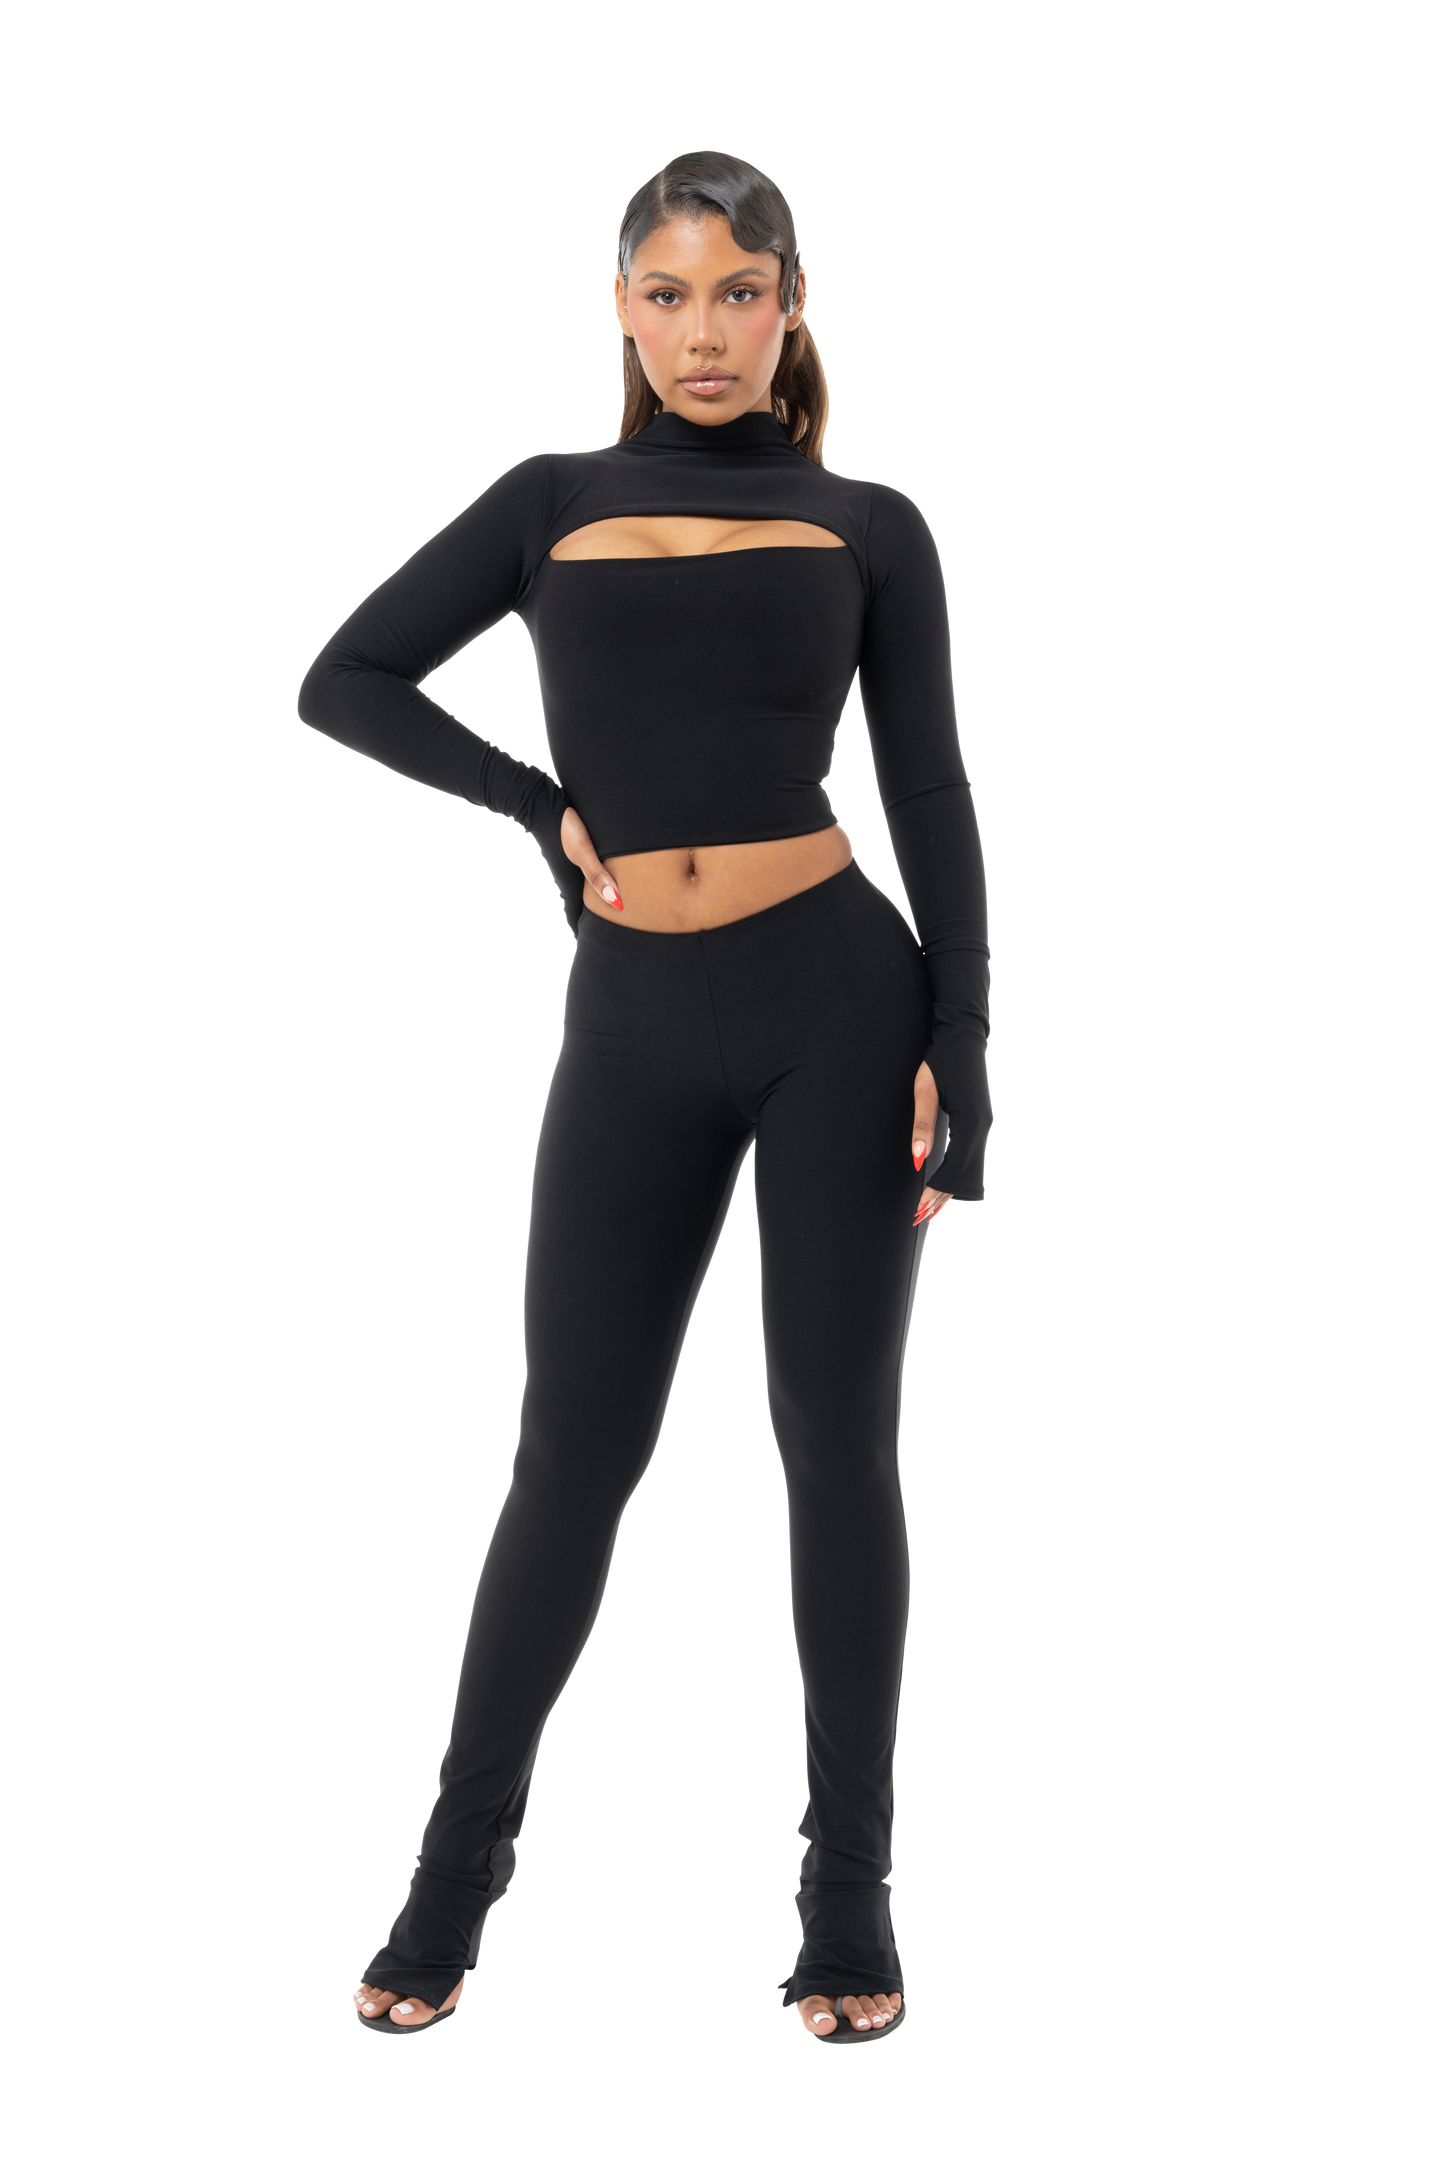  Kcocoo Womens Leggings-No See-Through High Waisted Tummy  Control Yoga Pants Workout Running Leggings Super Soft Tights Pants(Dark  Gray,S) : Sports & Outdoors